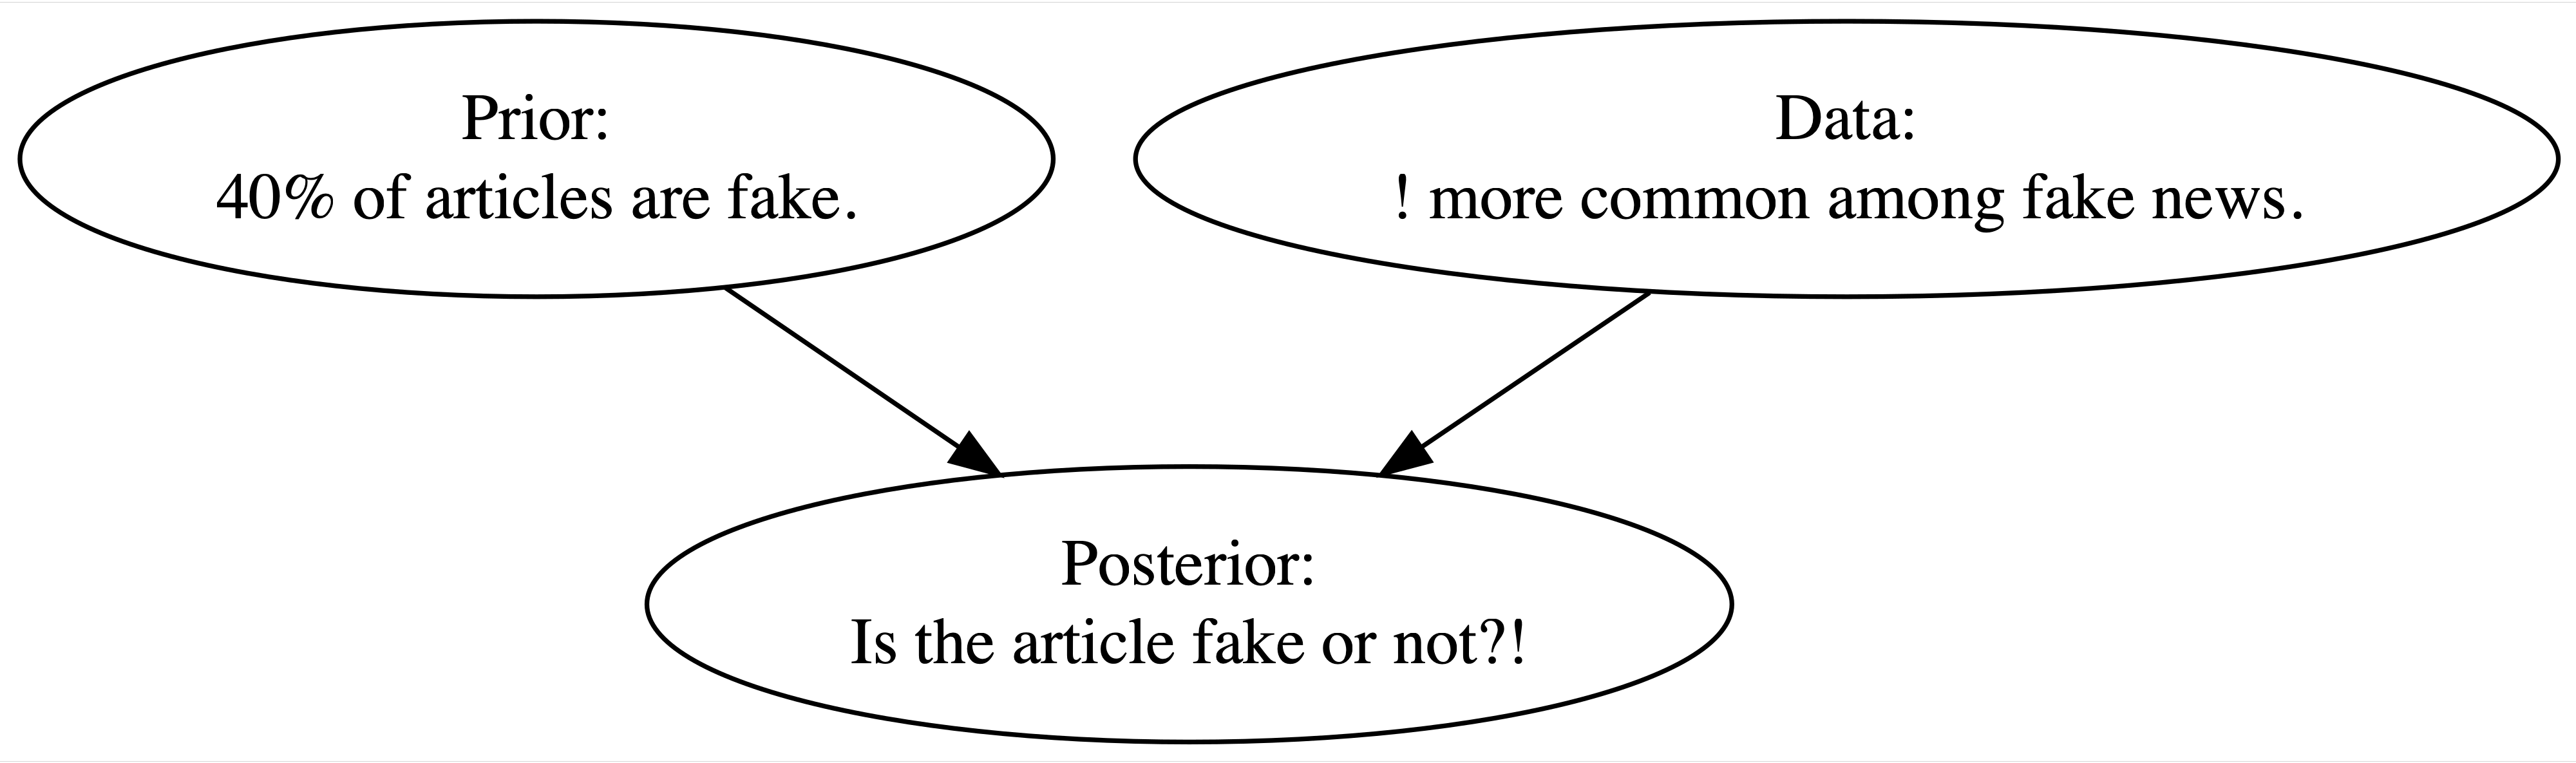 There are two ellipses at the top of the image. The first ellipse reads 'Prior: Only 40% of articles are fake'. The second ellipse reads 'Data: Exclamation points are more common among fake news'. There are two arrows each from the upper two ellipses leading to a third ellipse in the lower part of the image. The third ellipse reads 'Posterior: Is the article fake or not?'